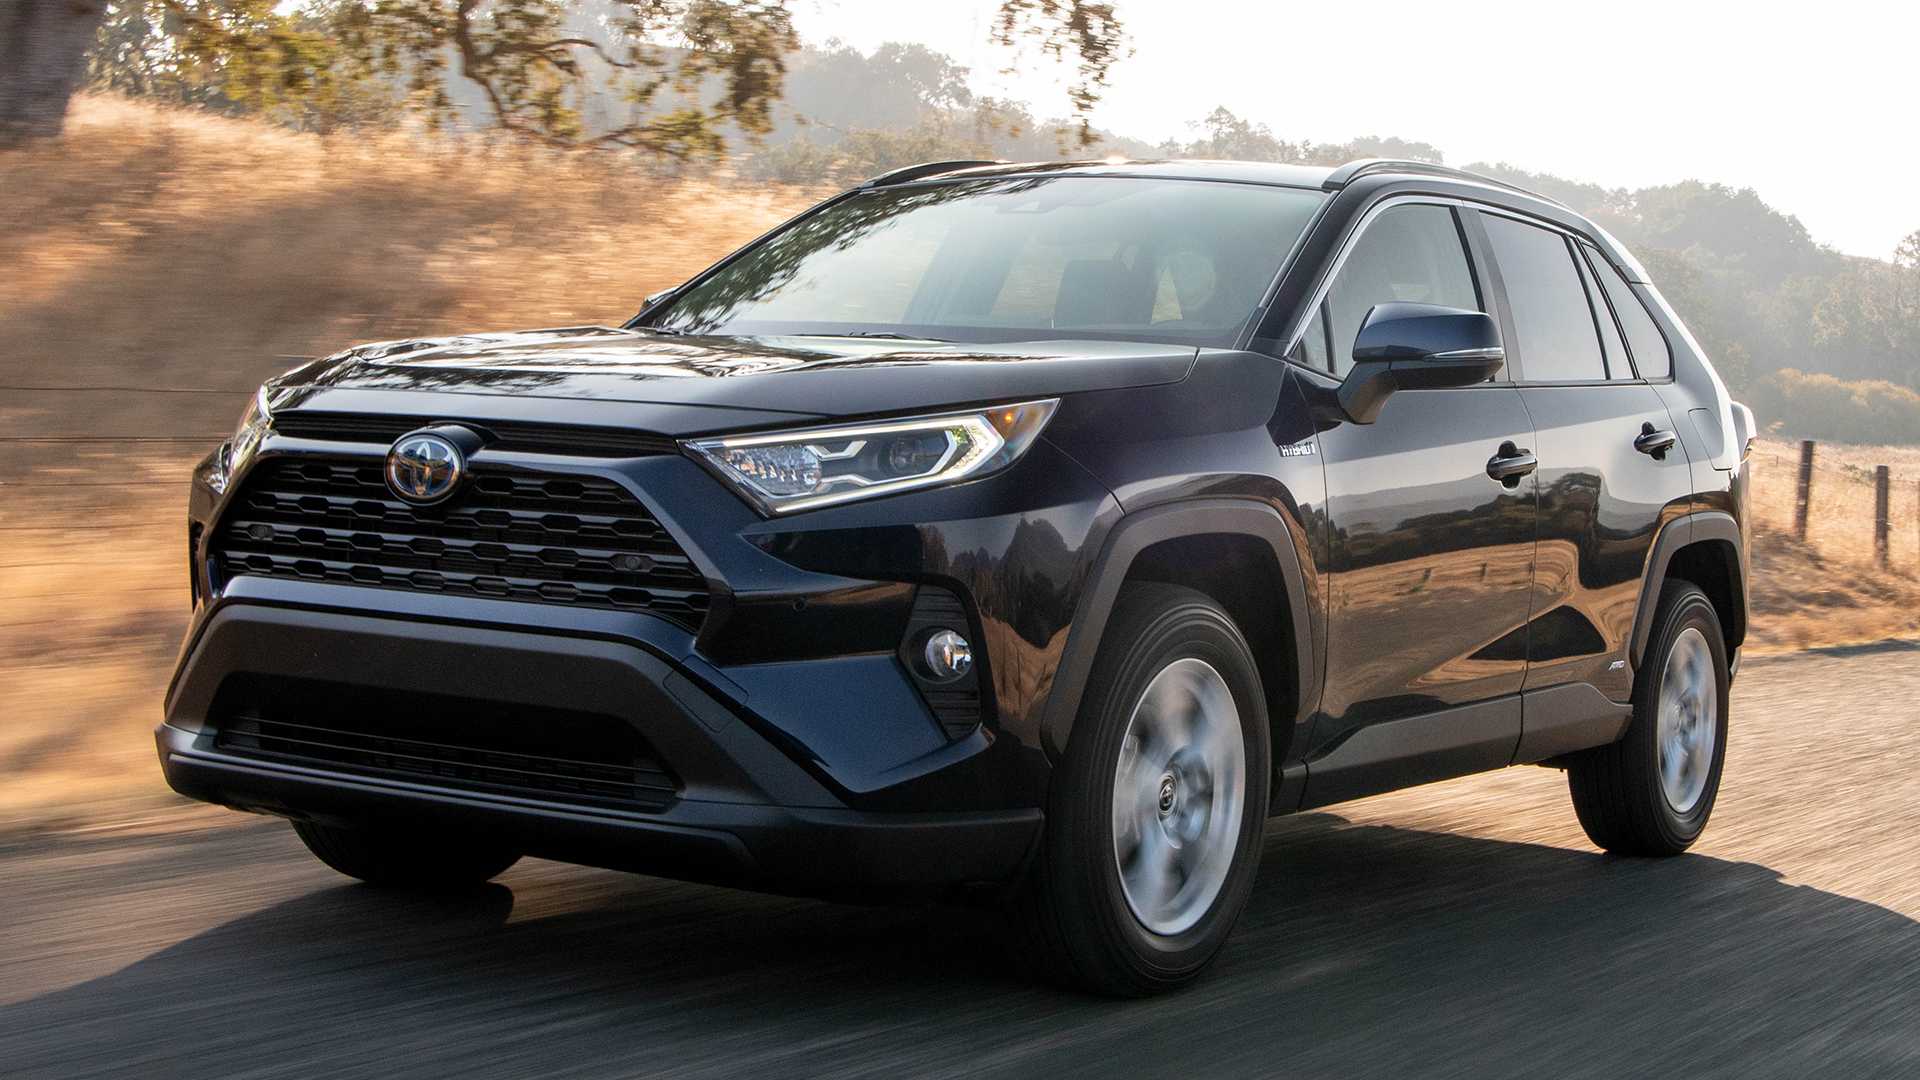 Image of a dark blue 2019 Toyota RAV4 driving on a country road.